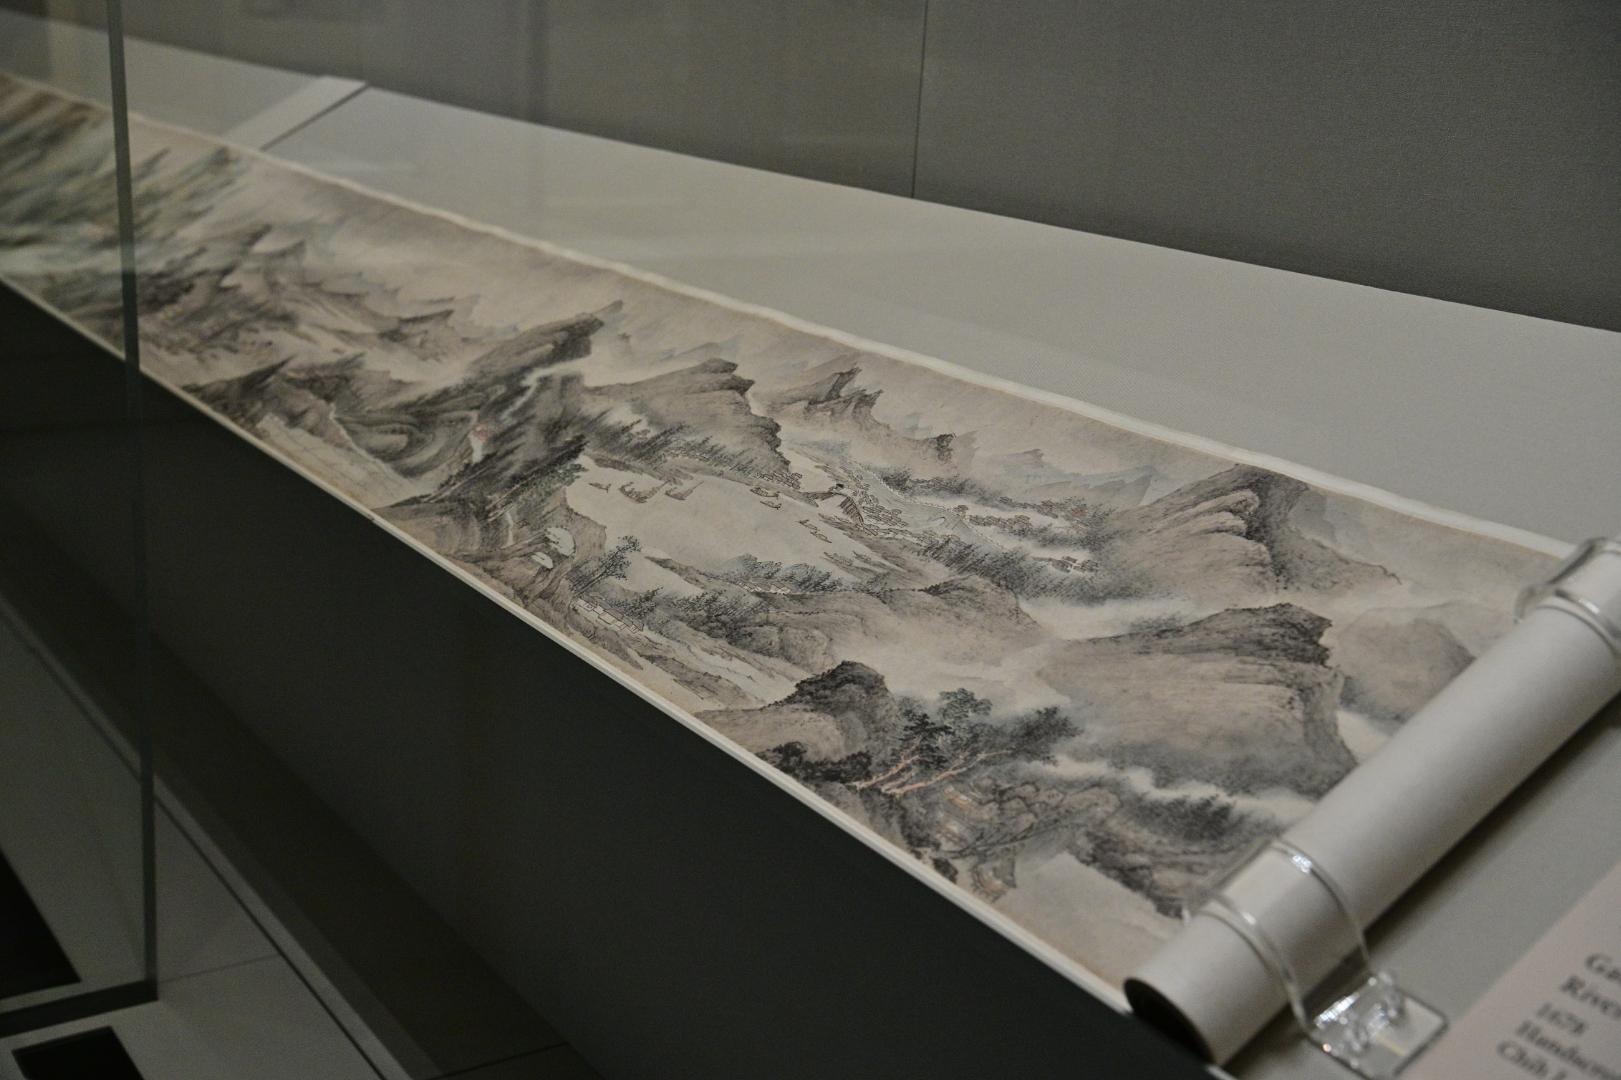 A wide array of new exhibitions are being held in the Hong Kong Museum of Art (HKMoA) to enable visitors to explore more stories that might have been out of the spotlight under the museum's four core collections. The exhibition "Mastering Masterpieces: The Essentials of Chinese Landscape Paintings" is being held on the fourth floor of the HKMoA. Picture shows the handscroll "Rivers and mountains without end" (partial) by Gao Jian.